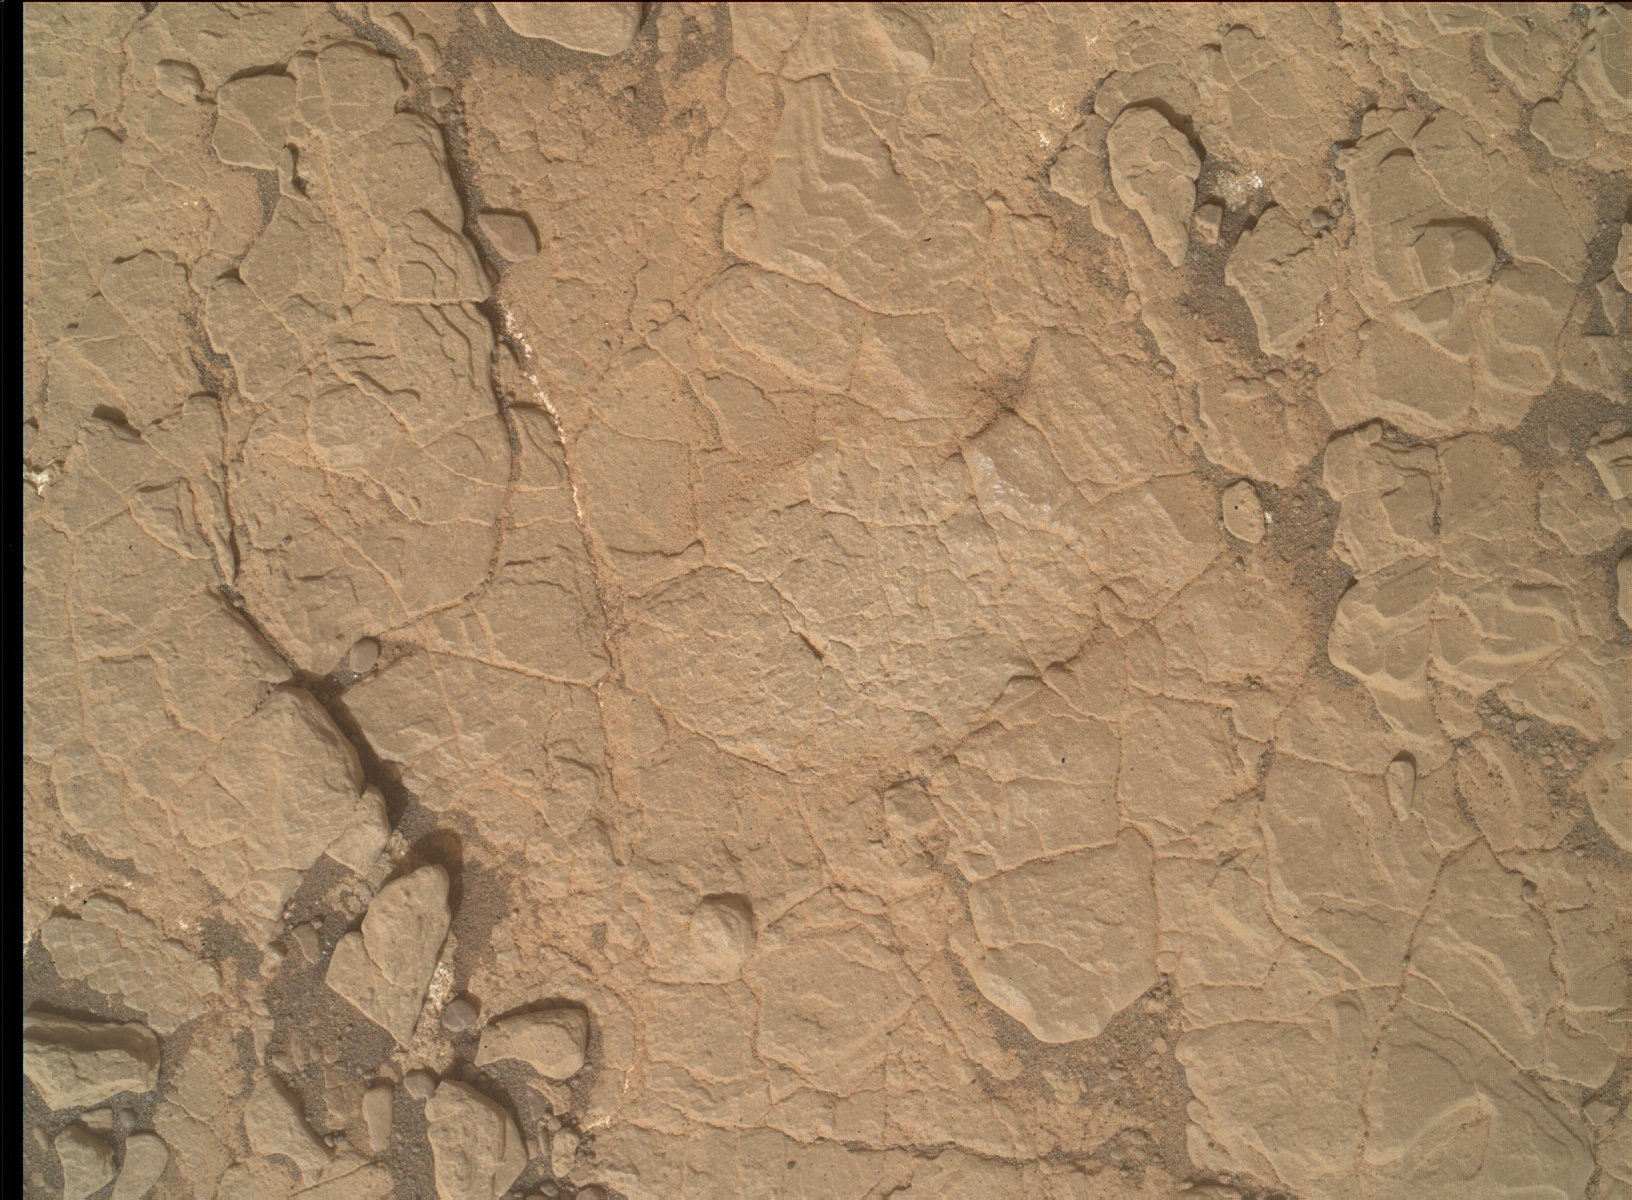 Nasa's Mars rover Curiosity acquired this image using its Mars Hand Lens Imager (MAHLI) on Sol 2858, at drive 2176, site number 82